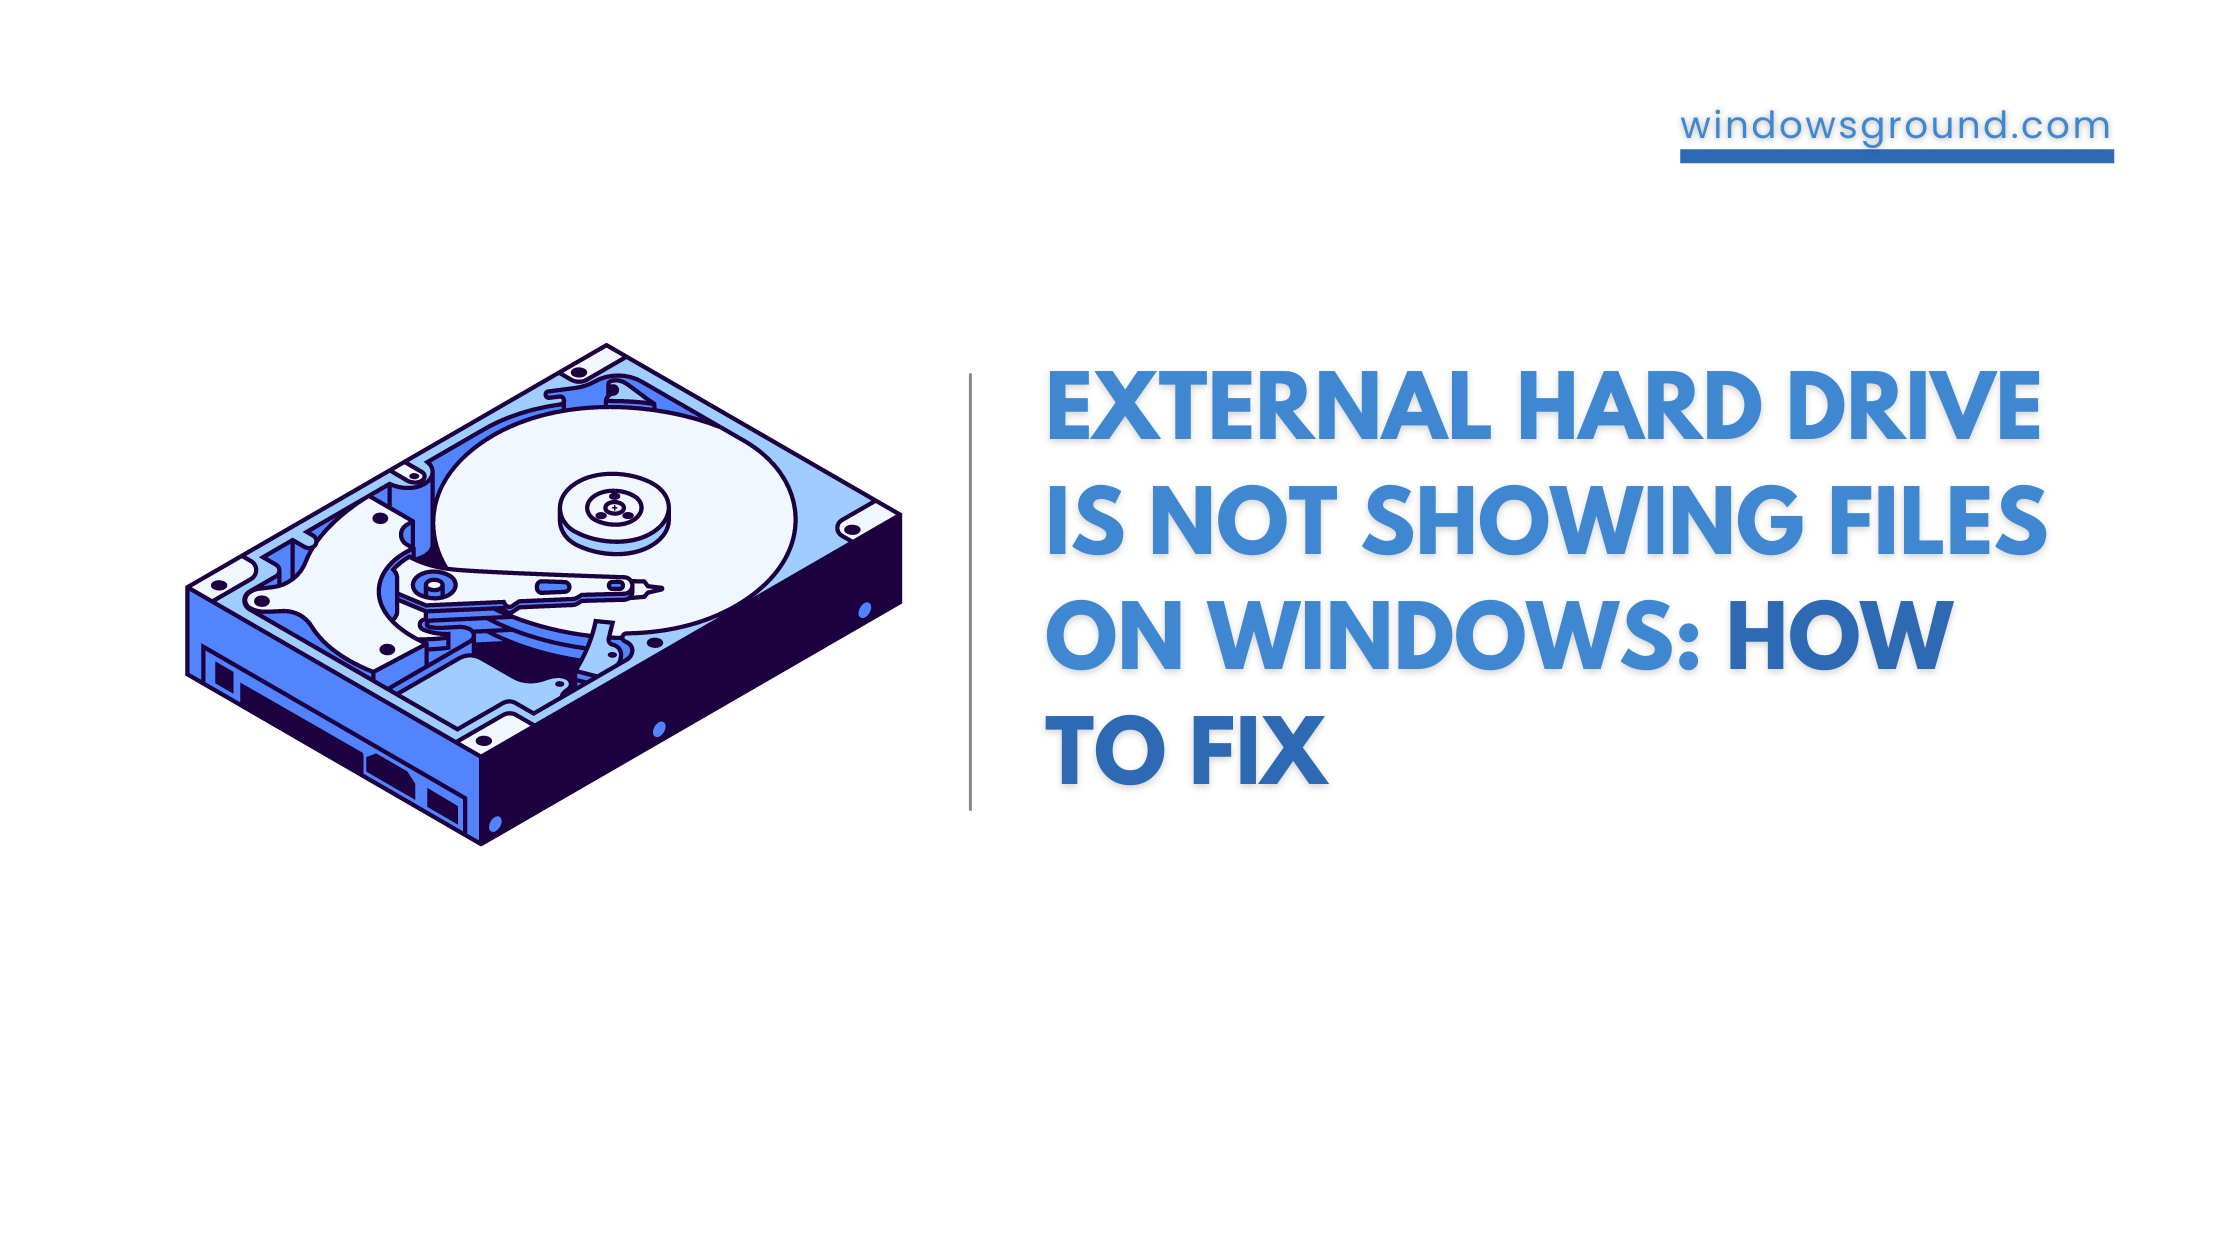 External Hard Drive Is Not Showing Files On Windows How To Fix (1)